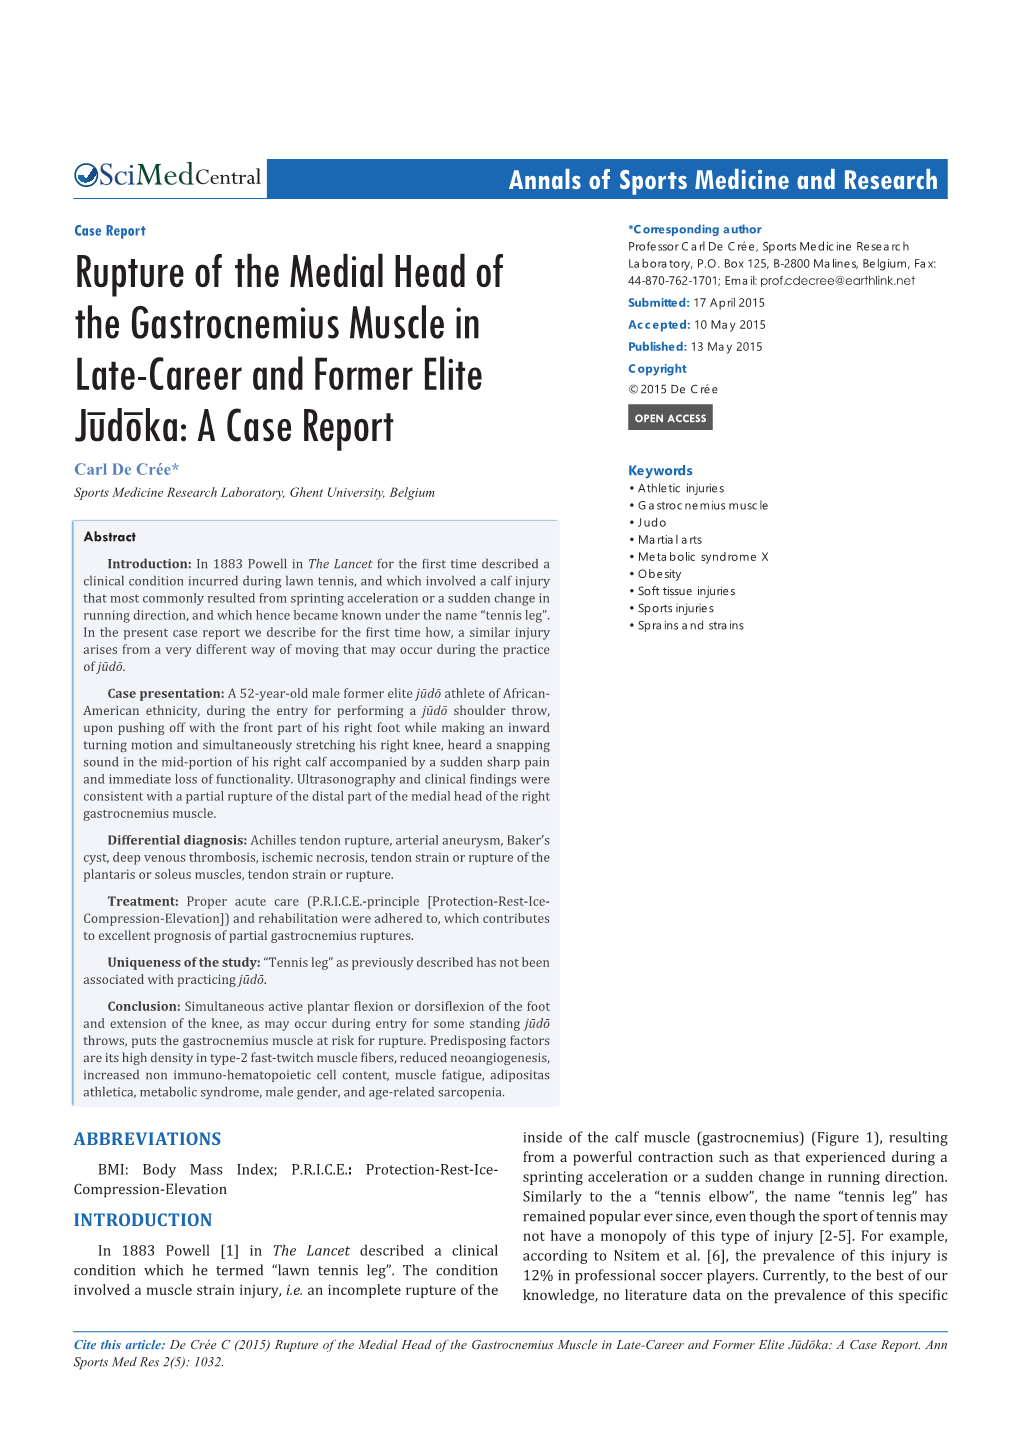 Rupture of the Medial Head of the Gastrocnemius Muscle in Late-Career and Former Elite Jūdōka: a Case Report